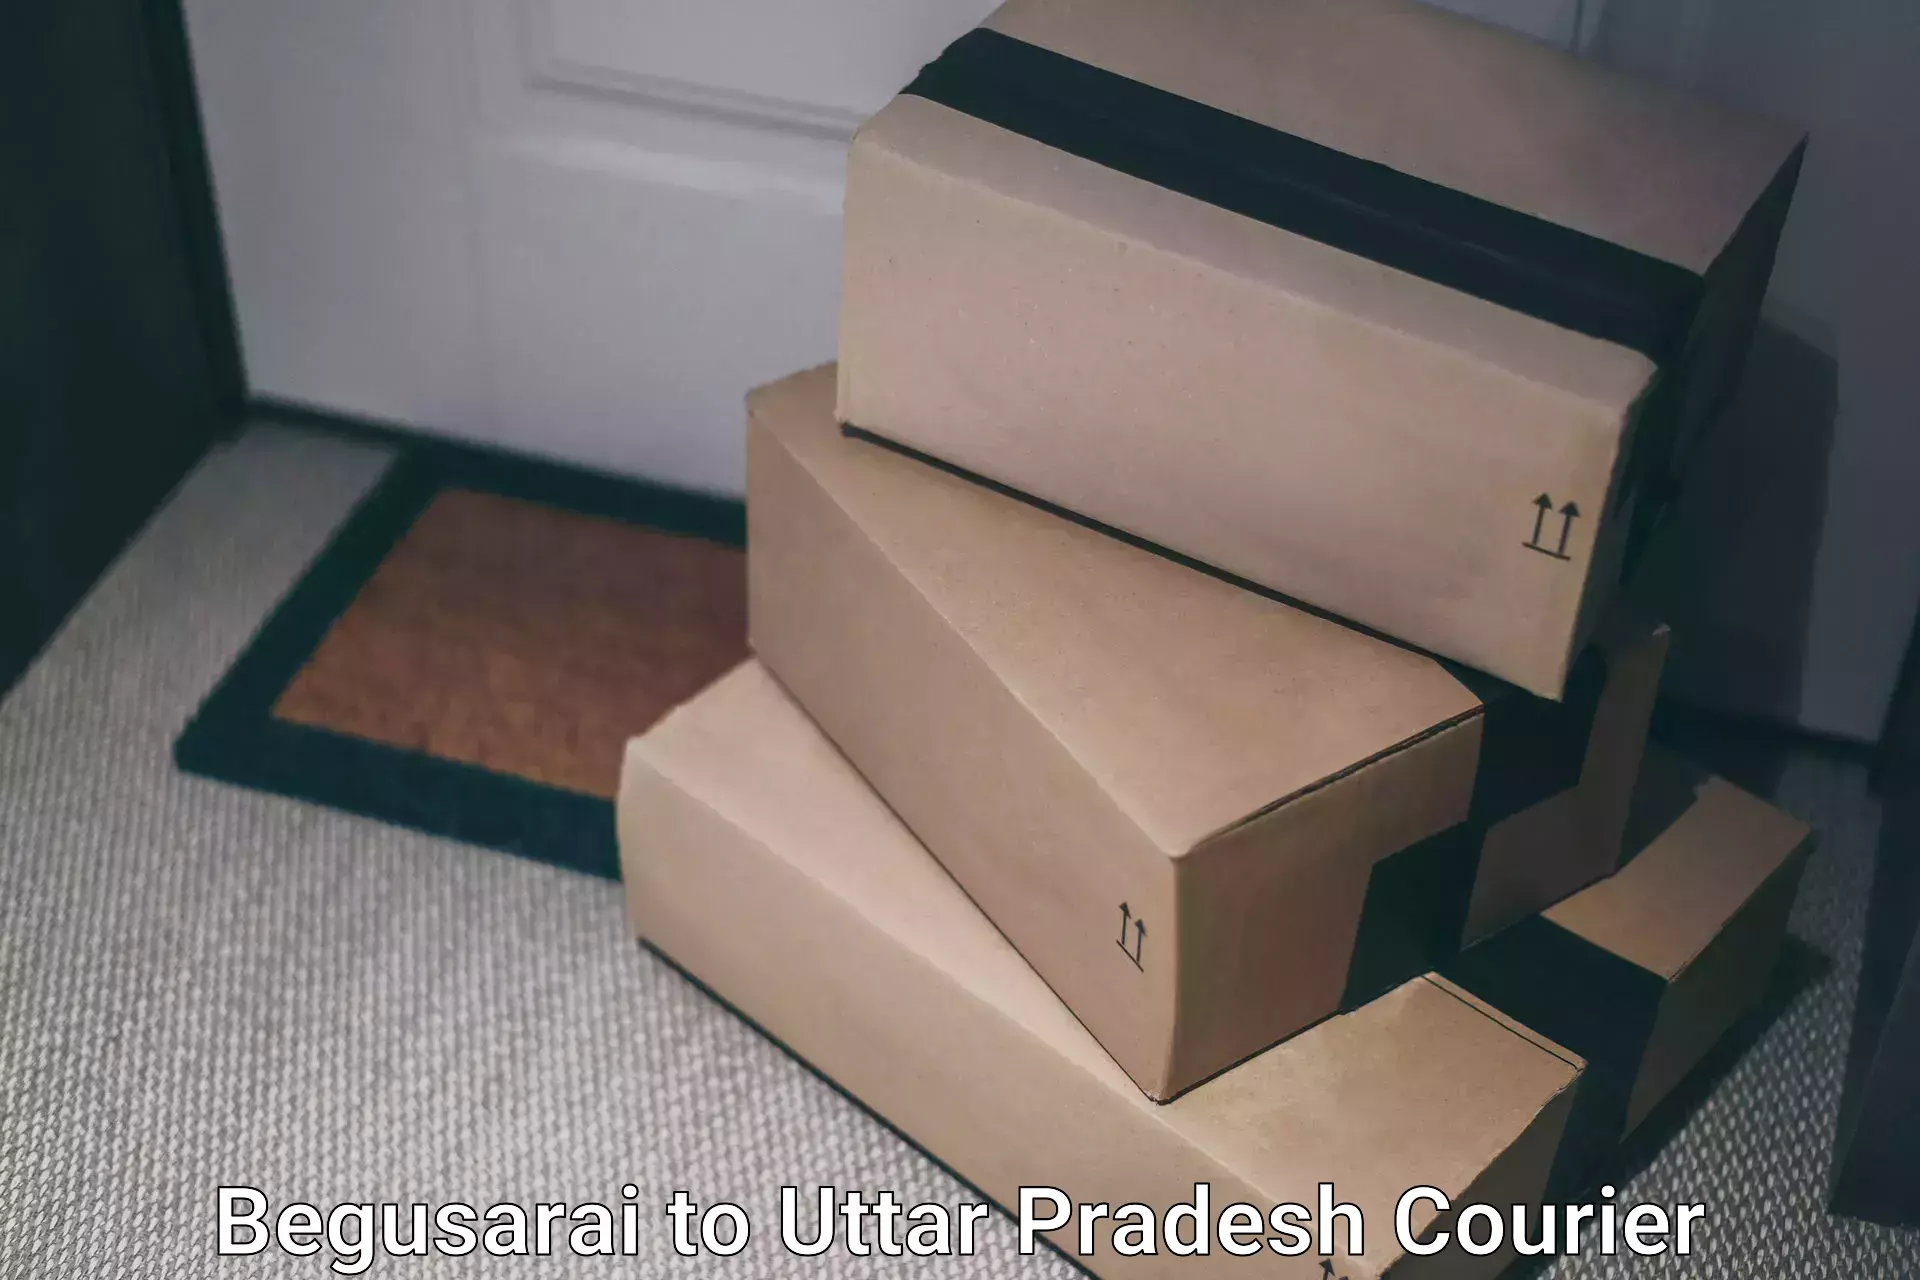 Professional courier services in Begusarai to Ganj Dundwara